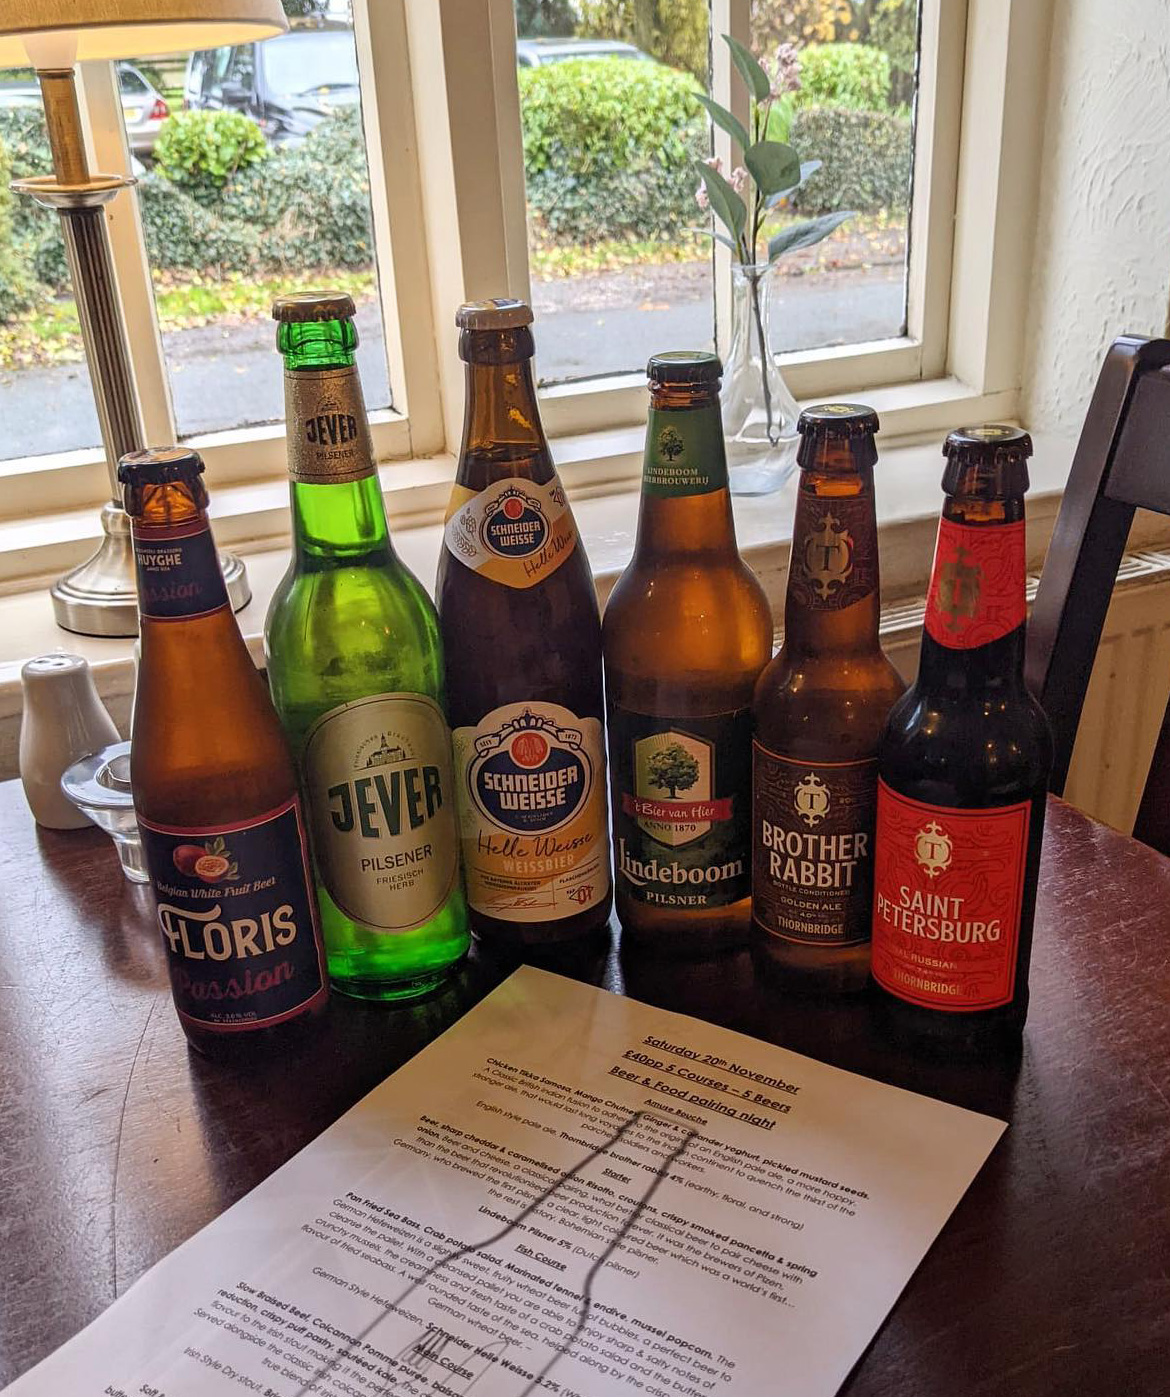 A selection of bottled beers from around the world